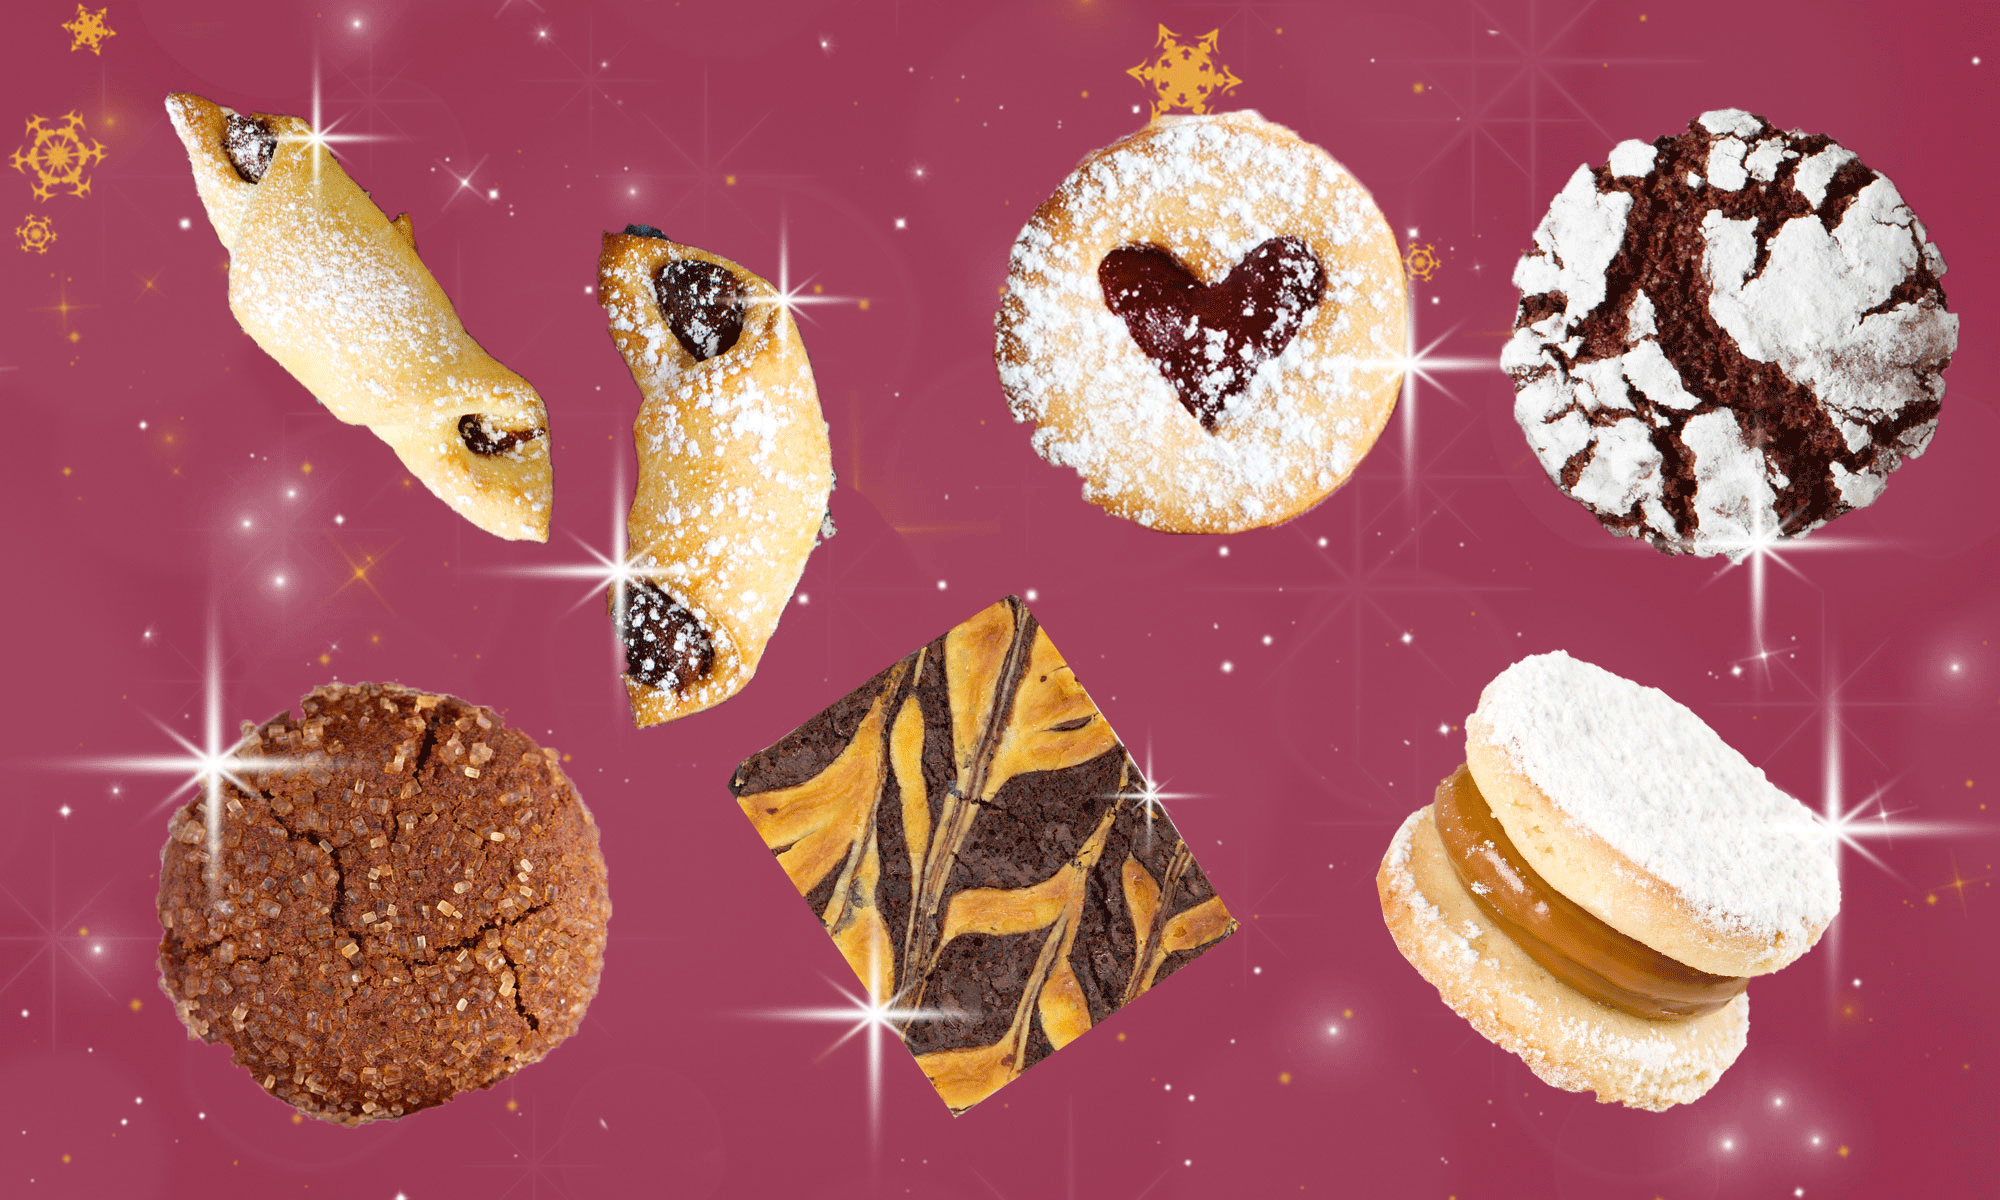 Different styles of cookies — including linzer, ruguleh, chocolate crinkle, and sandwich cookies — on a sparkly background.